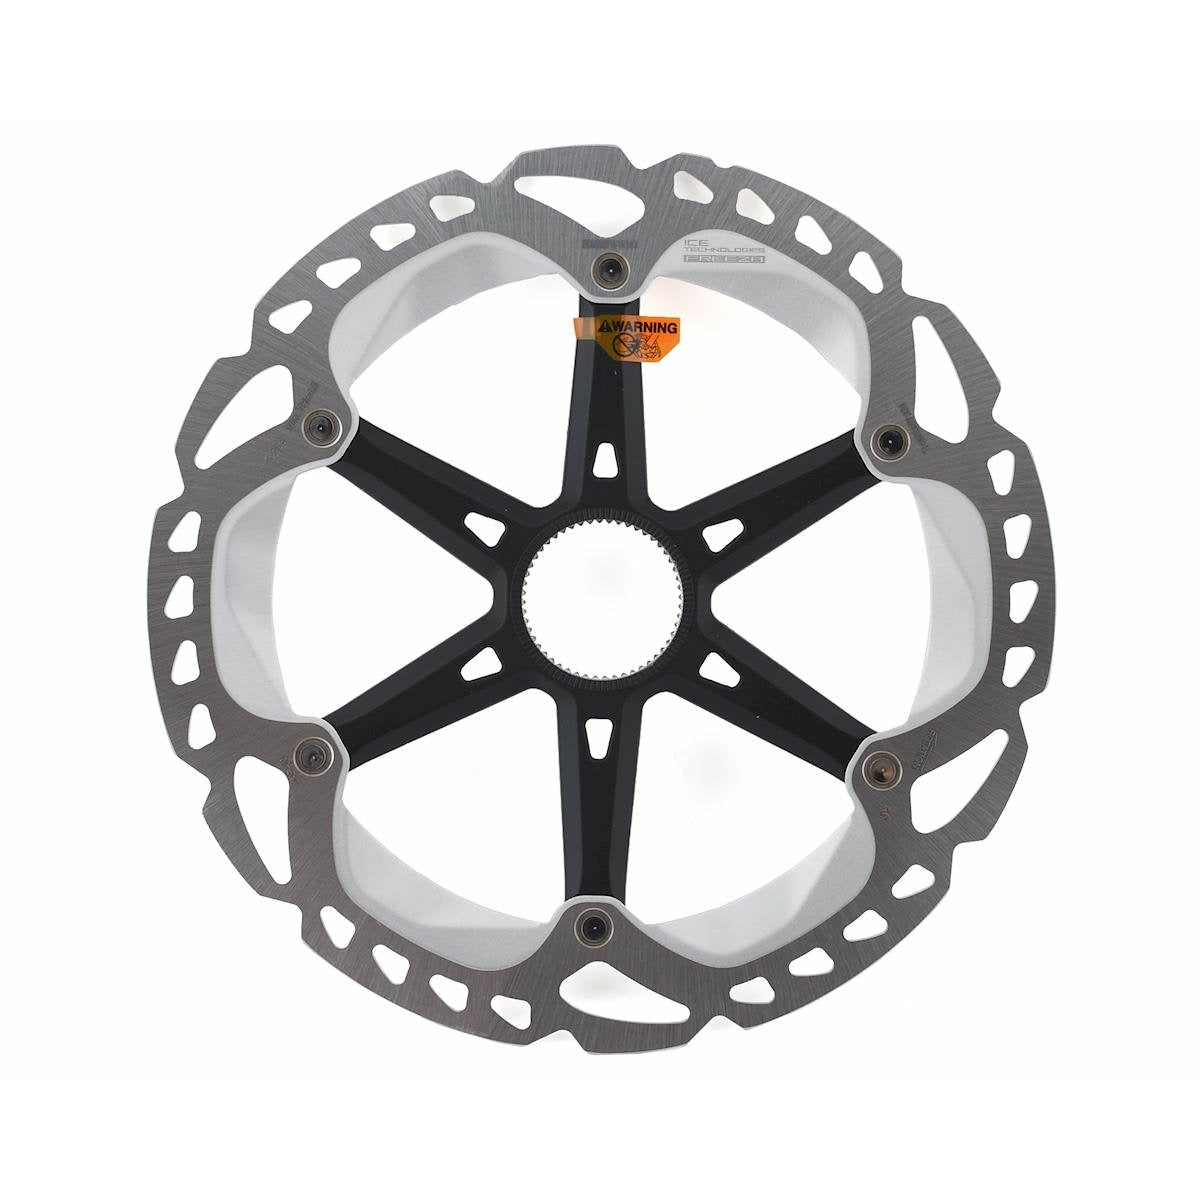 ROTOR FOR DISC BRAKE, RT-MT800, L 203MM, W/LOCK RING